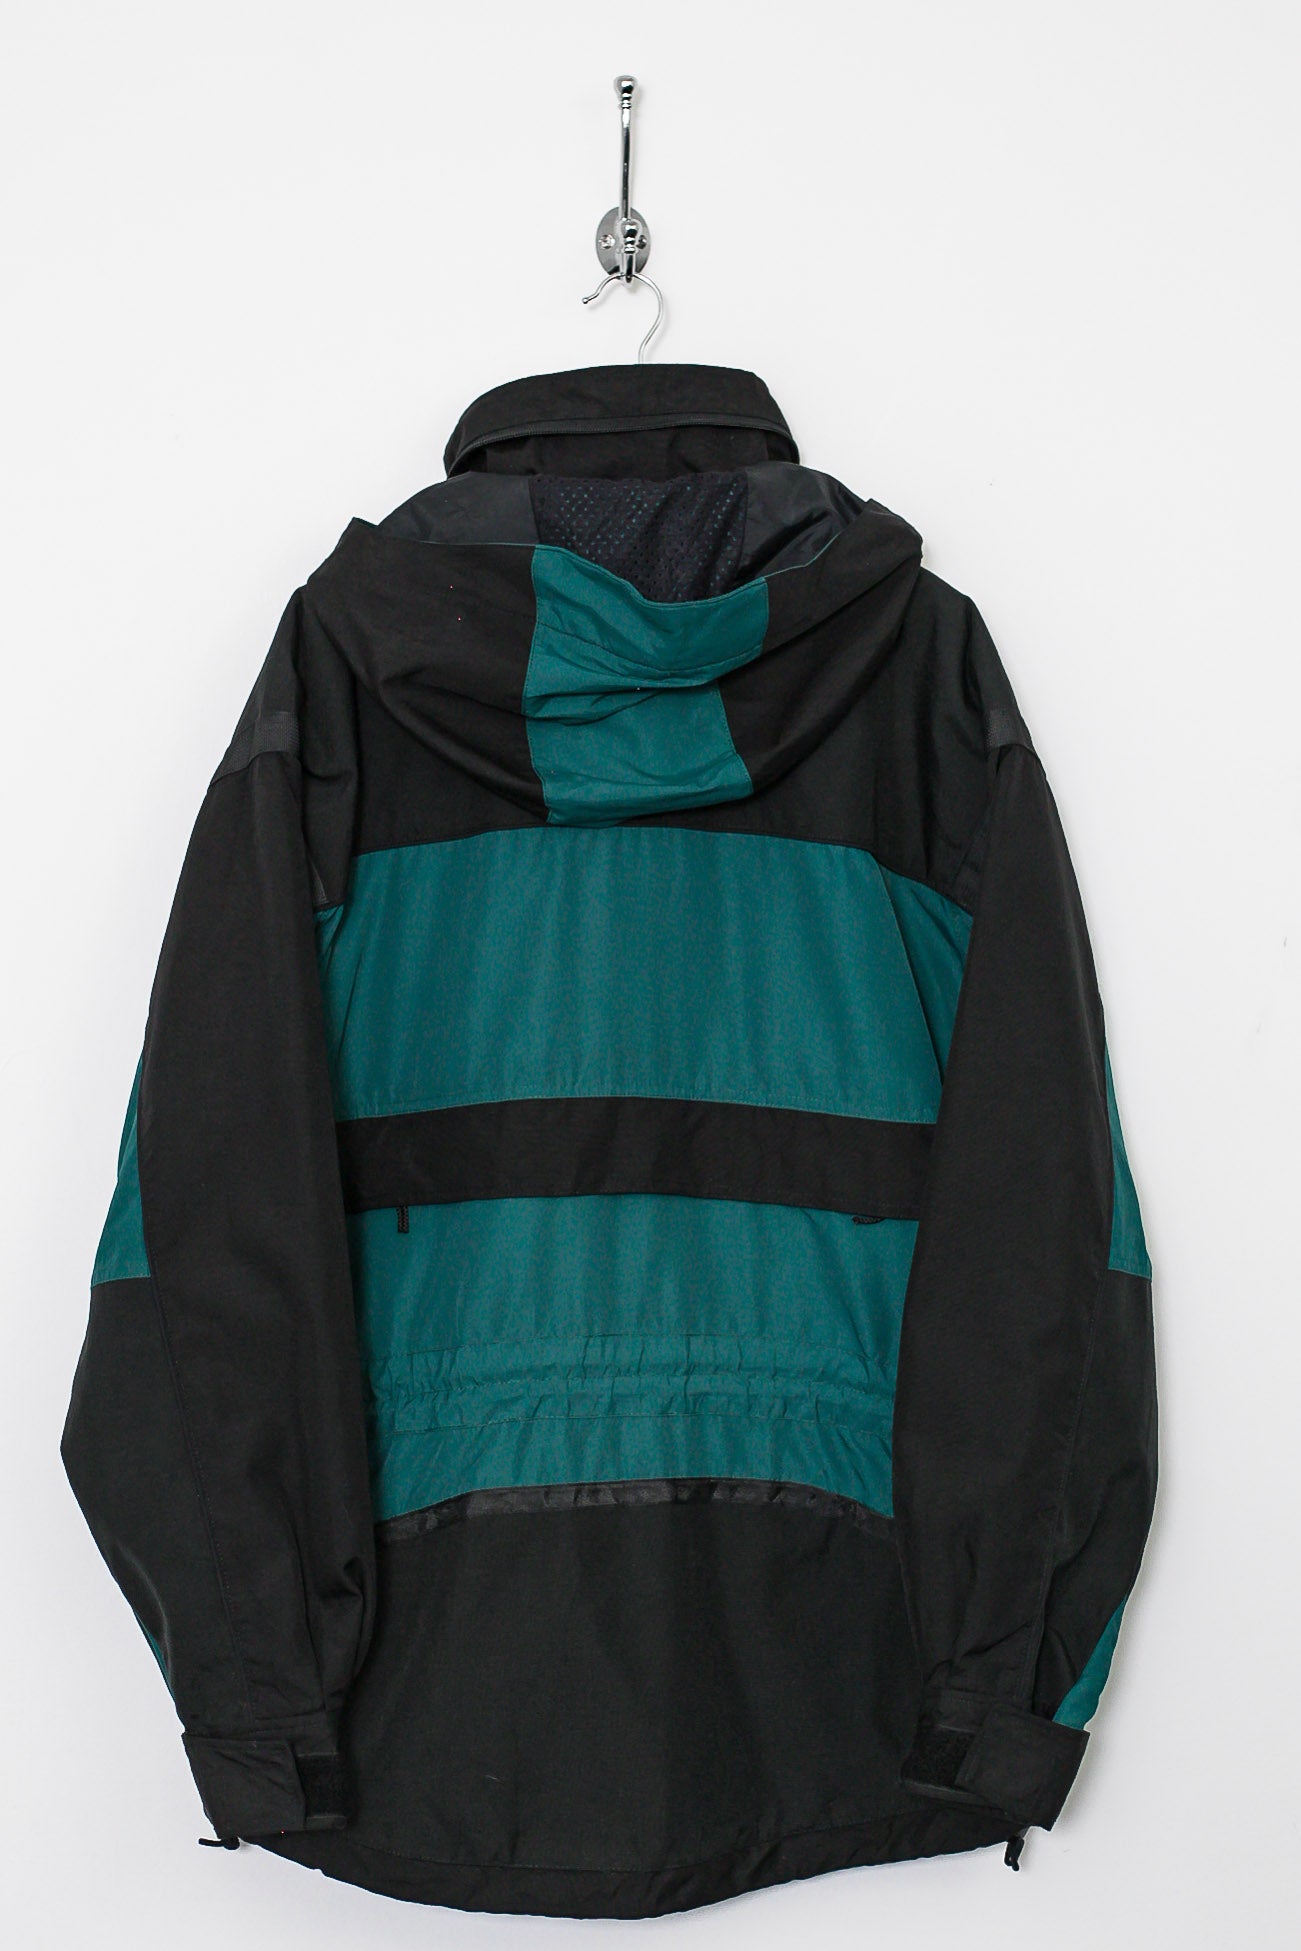 Rare 90s The North Face Steep Tech Jacket (L) – Stocked Vintage